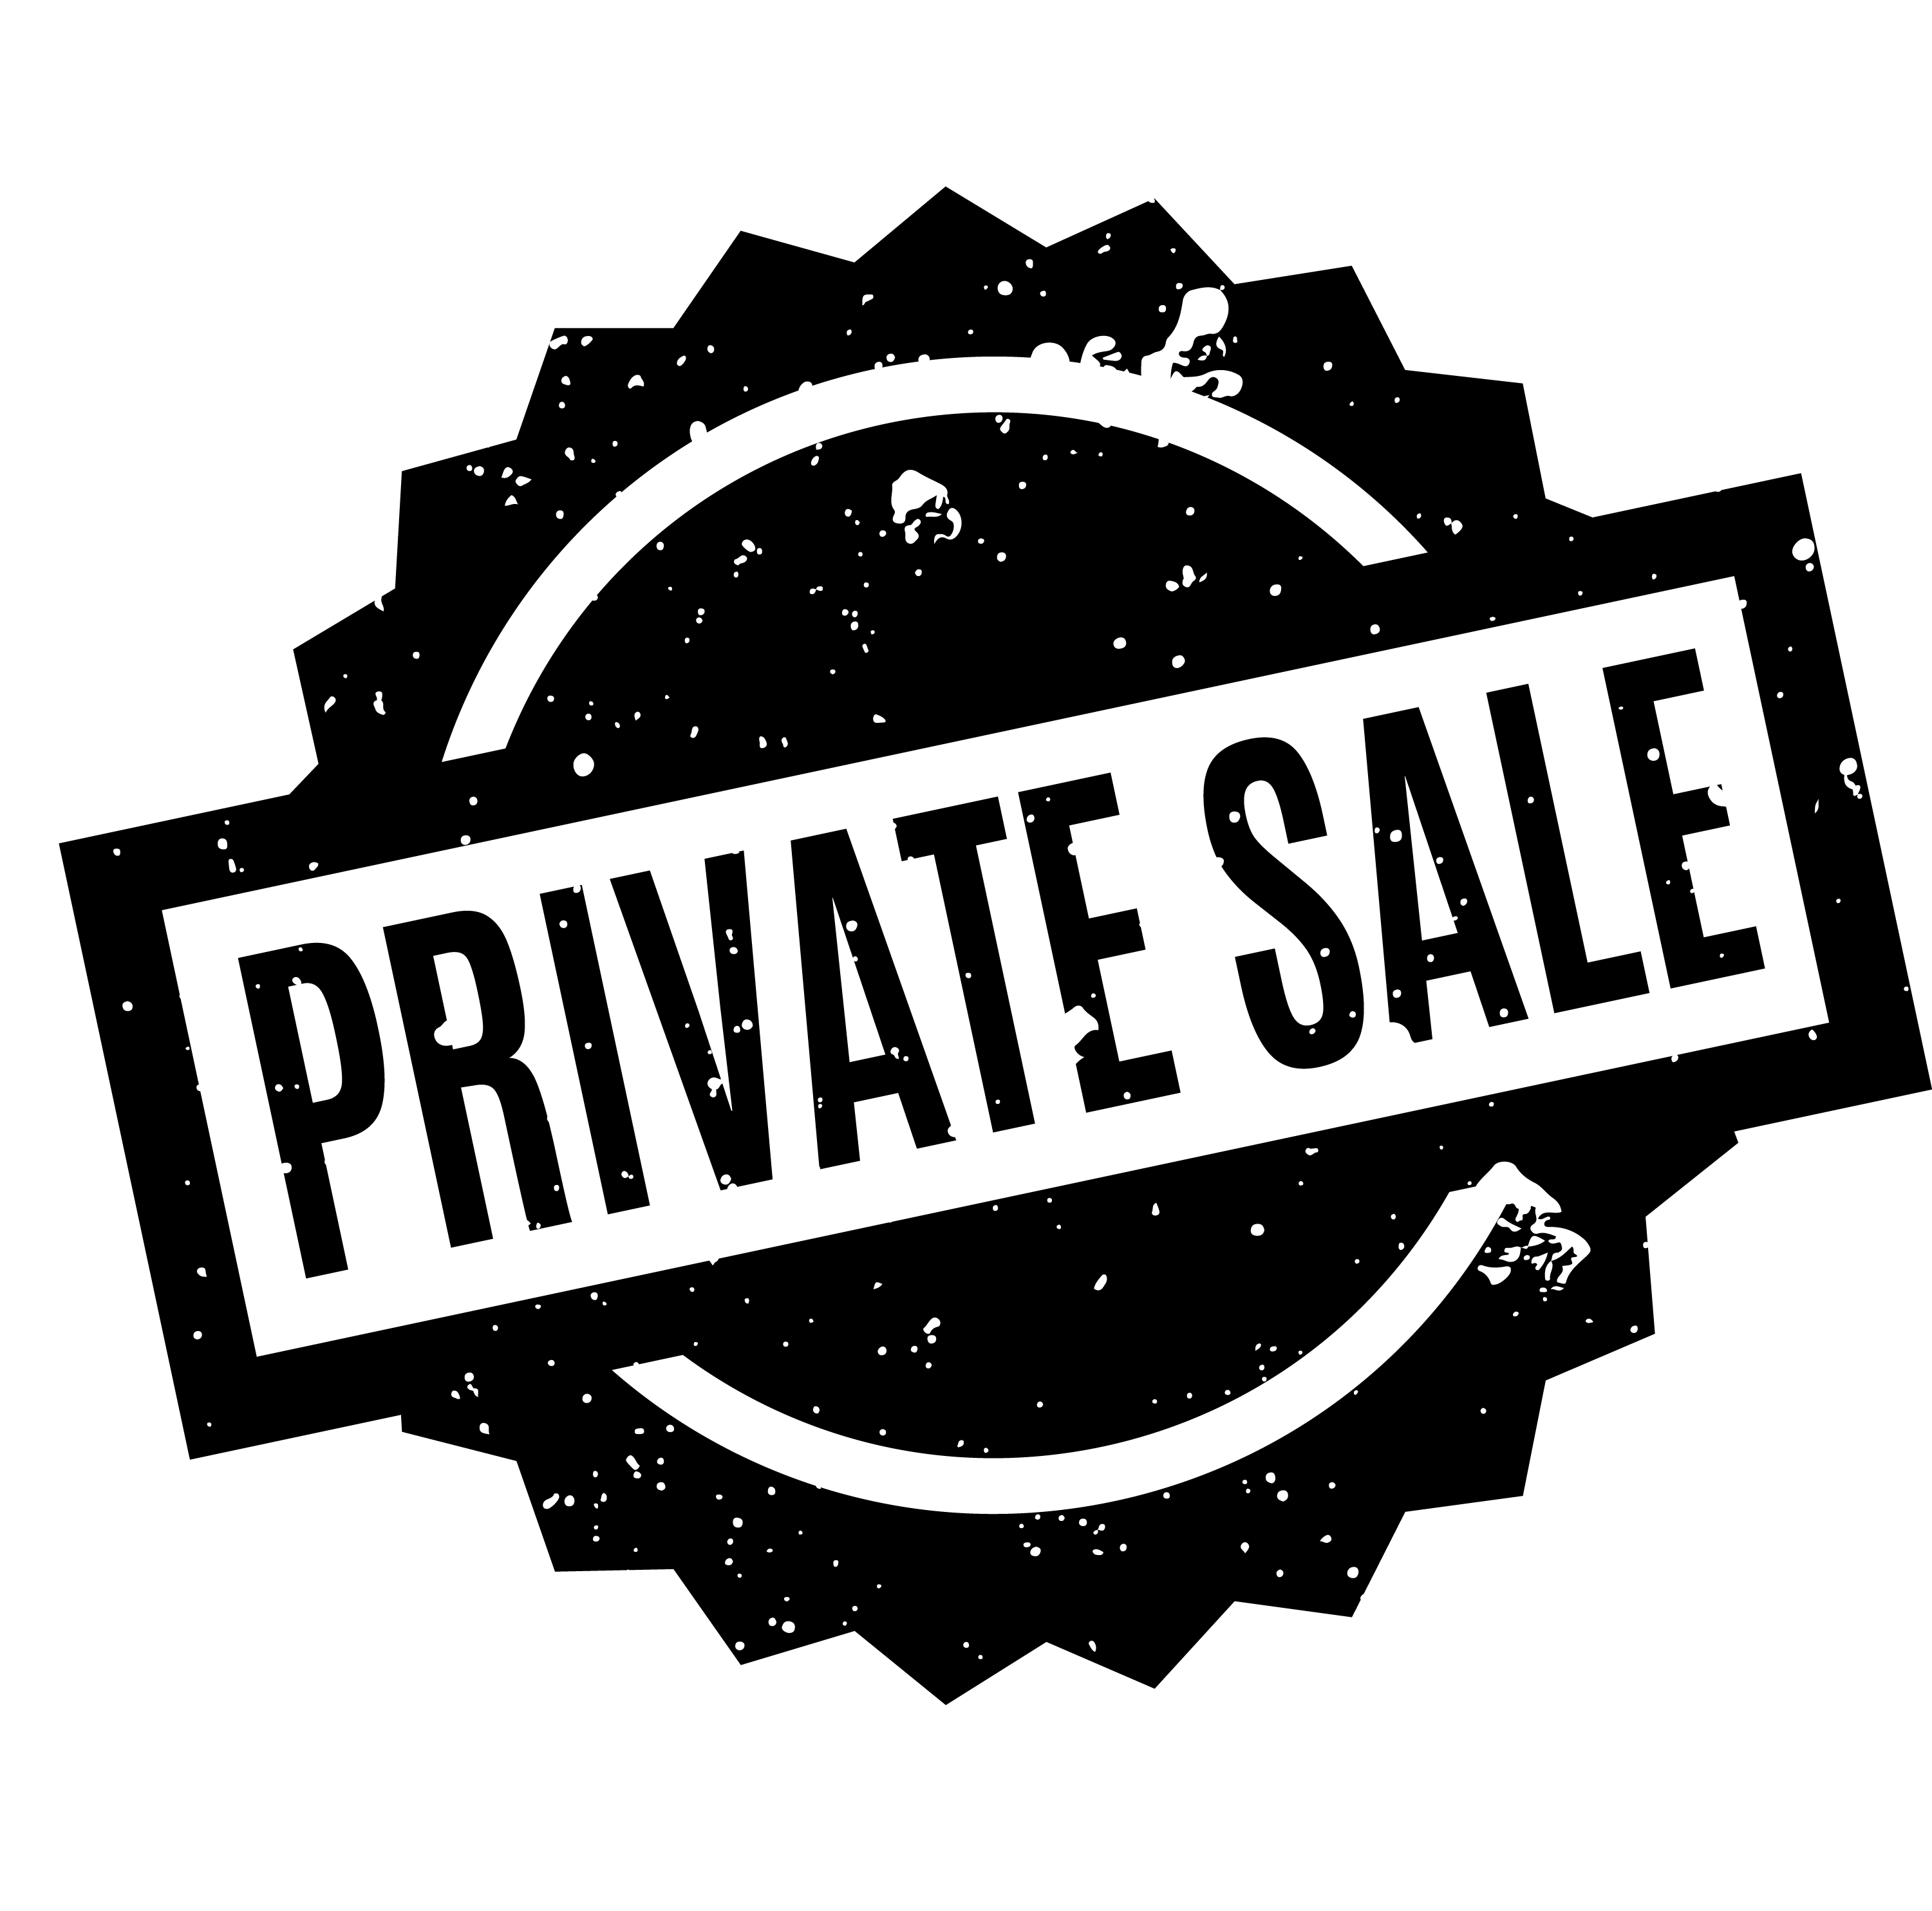 Domain seller asks for $2,500 to keep sale private